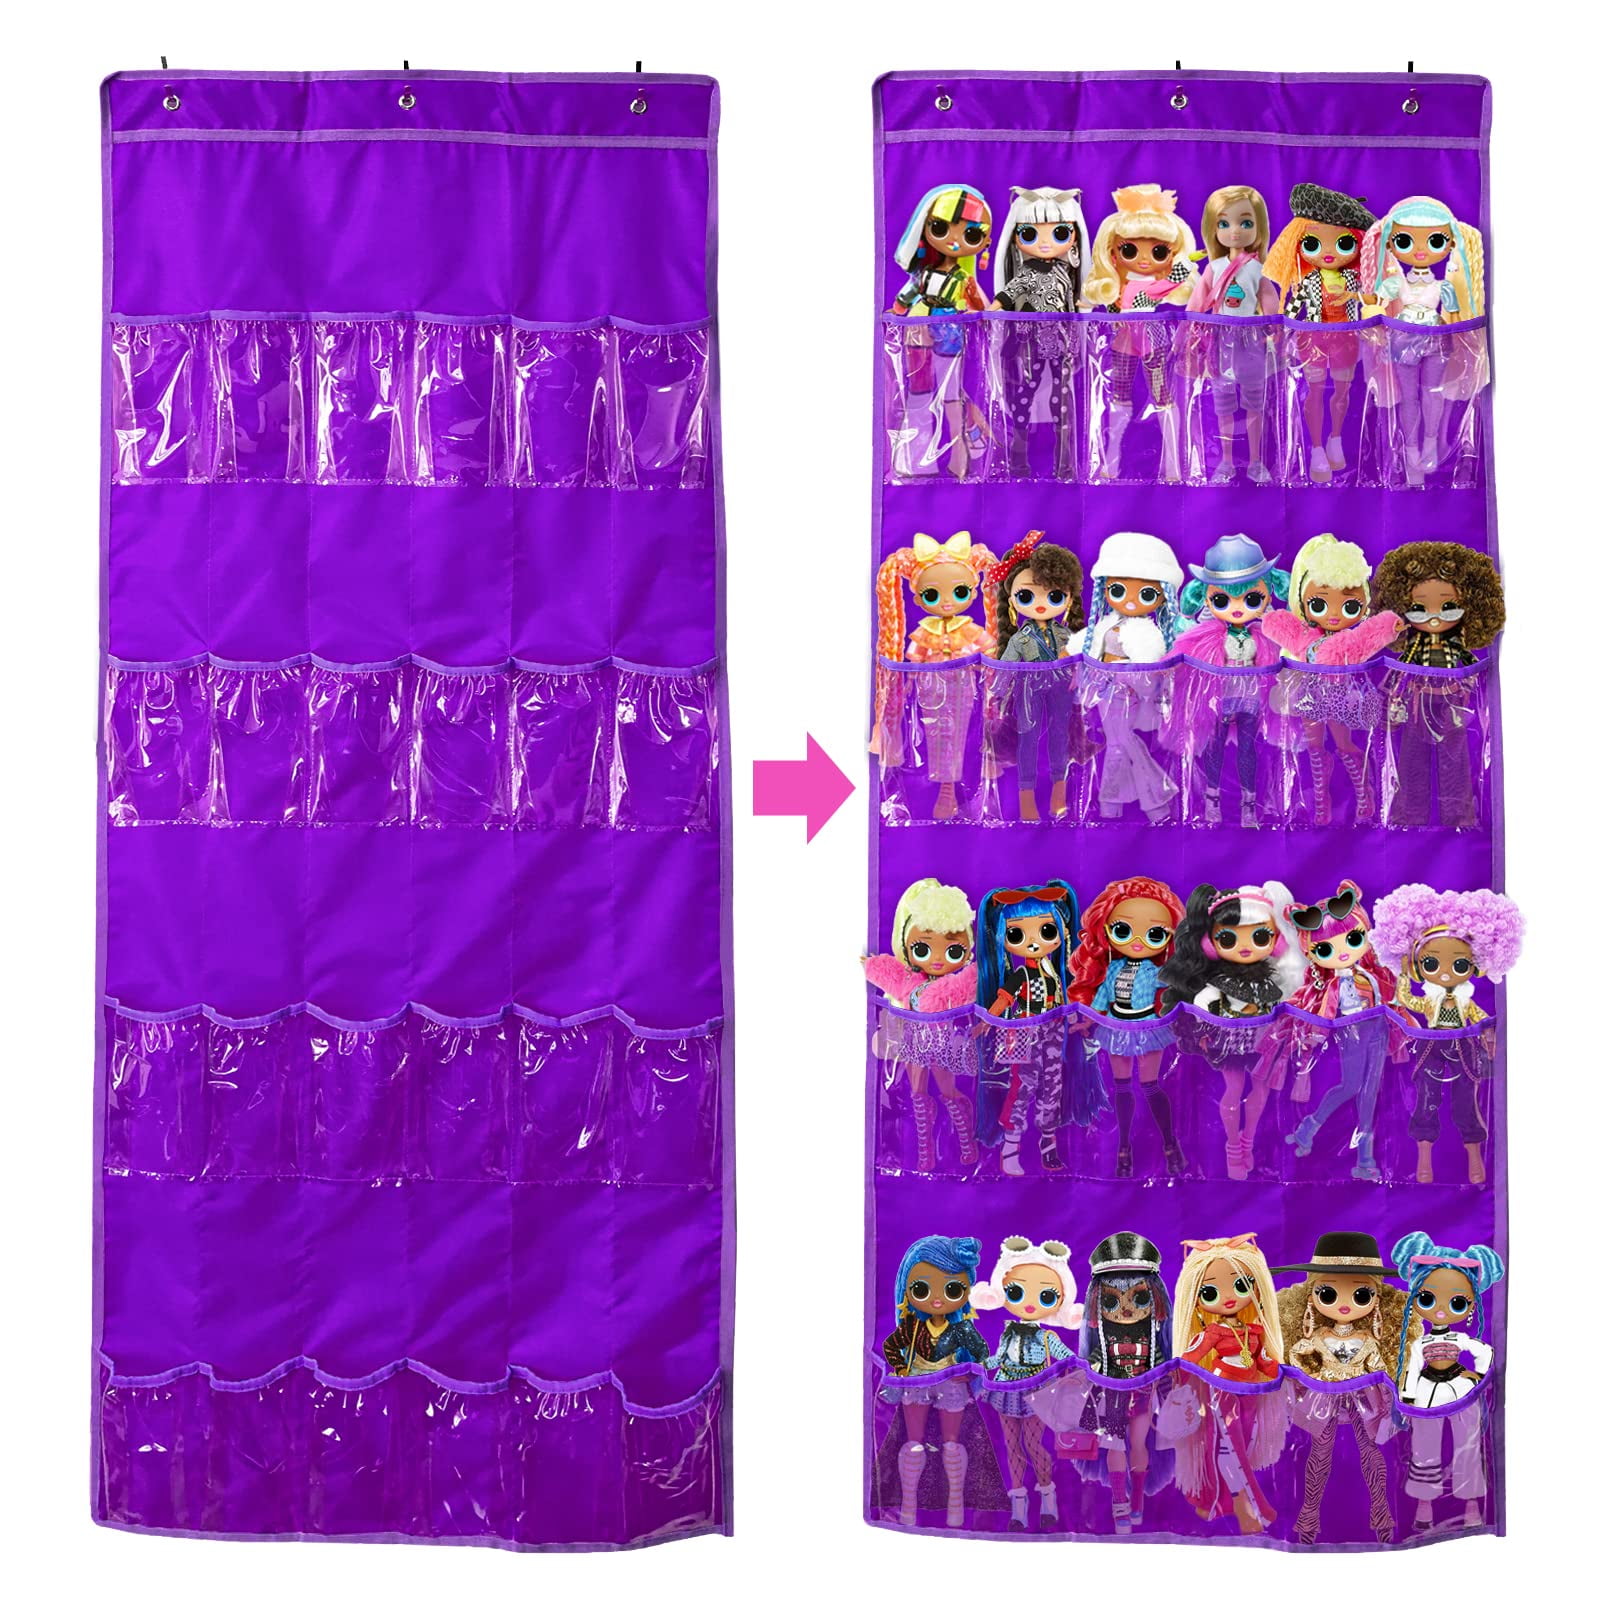 Hanging Over Door Toy Storage Organizer (24 Pockets), Compatible with Lol OMG Dolls Barbie Dolls Surprise Doll (Toys Not Included), Purple(57.5''x22